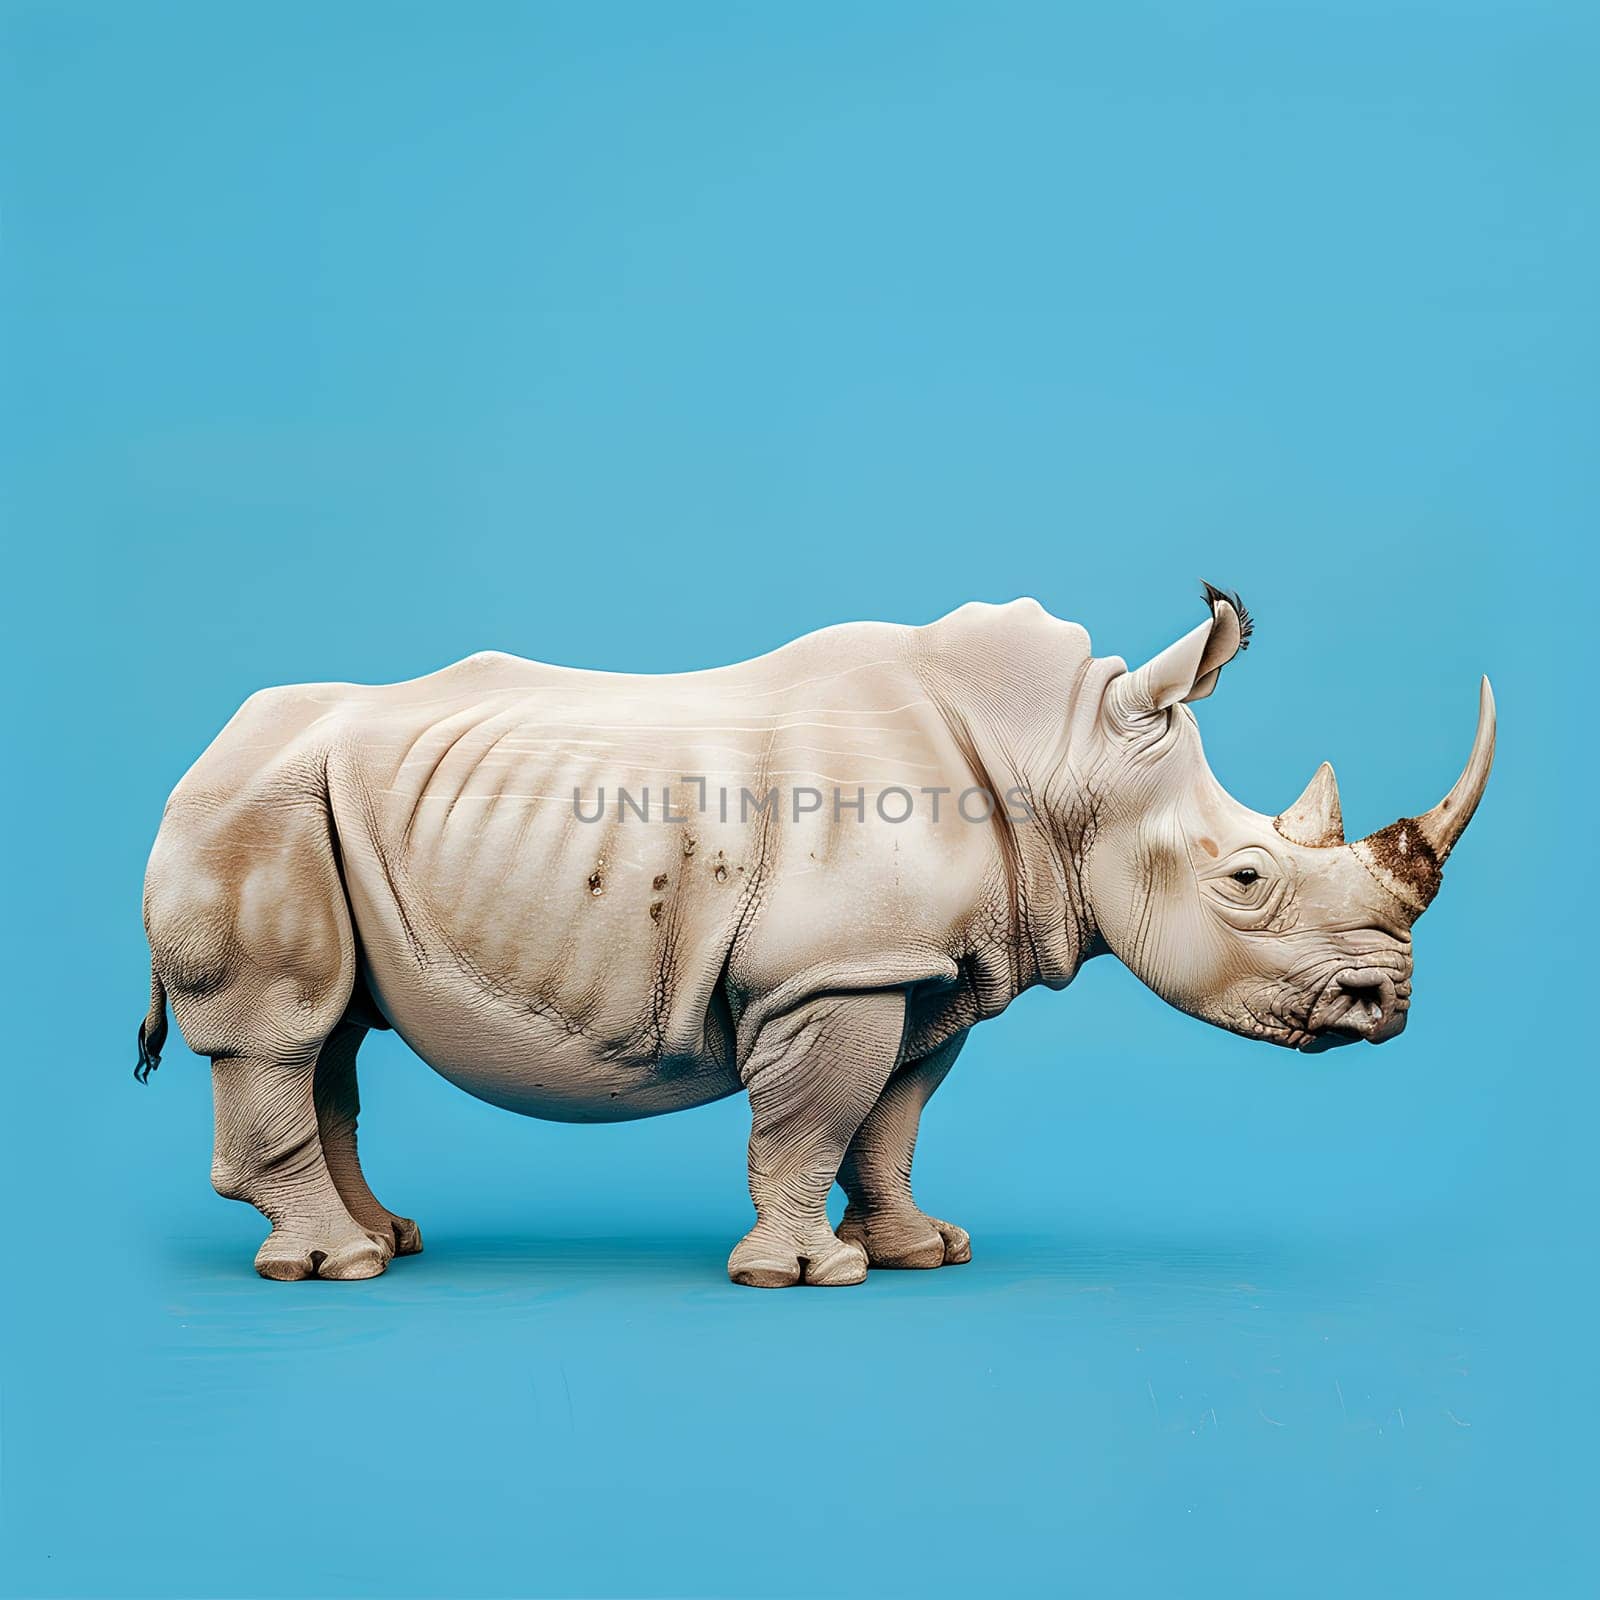 A sculpture of a white rhinoceros, a terrestrial animal, standing on a blue background. The fawncolored creature has a distinctive snout